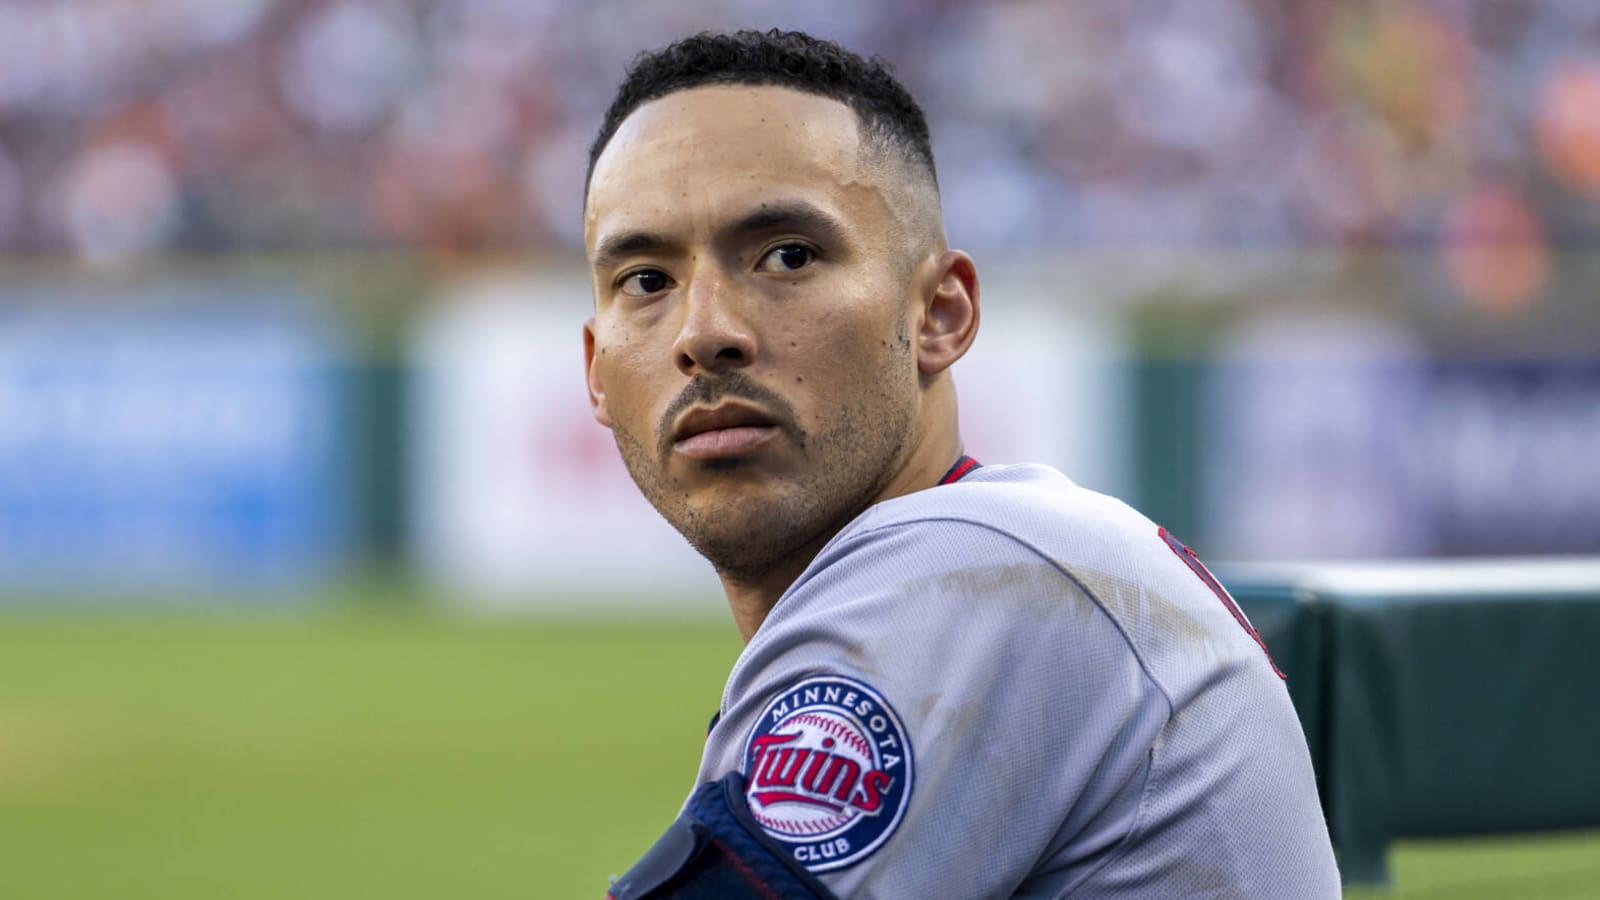 Giants, Carlos Correa agree to massive 13-year, $350M deal